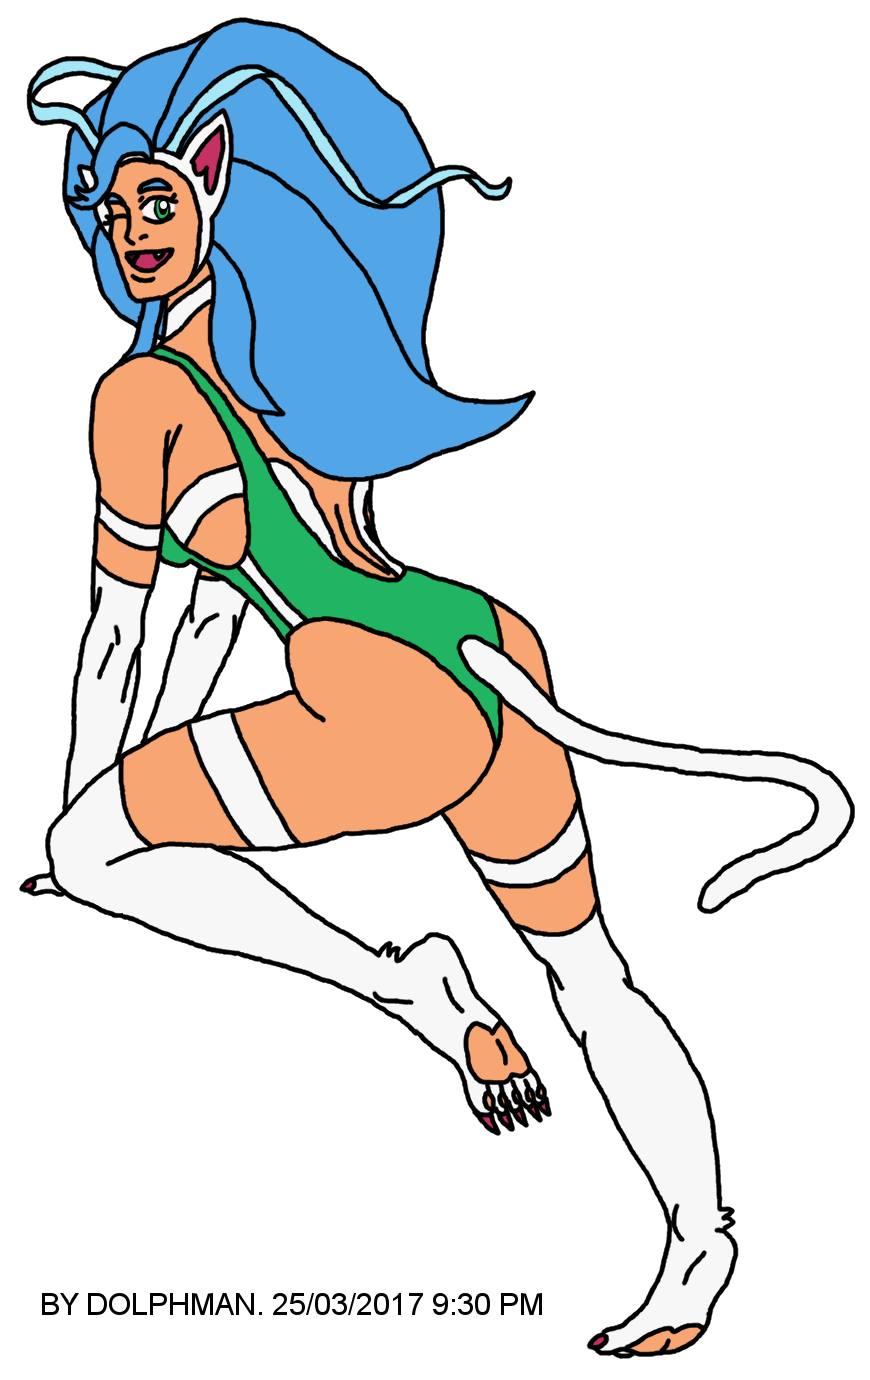 [Image: felicia_in_a_one_piece_swimsuit_by_retro...b3gfzs.png]